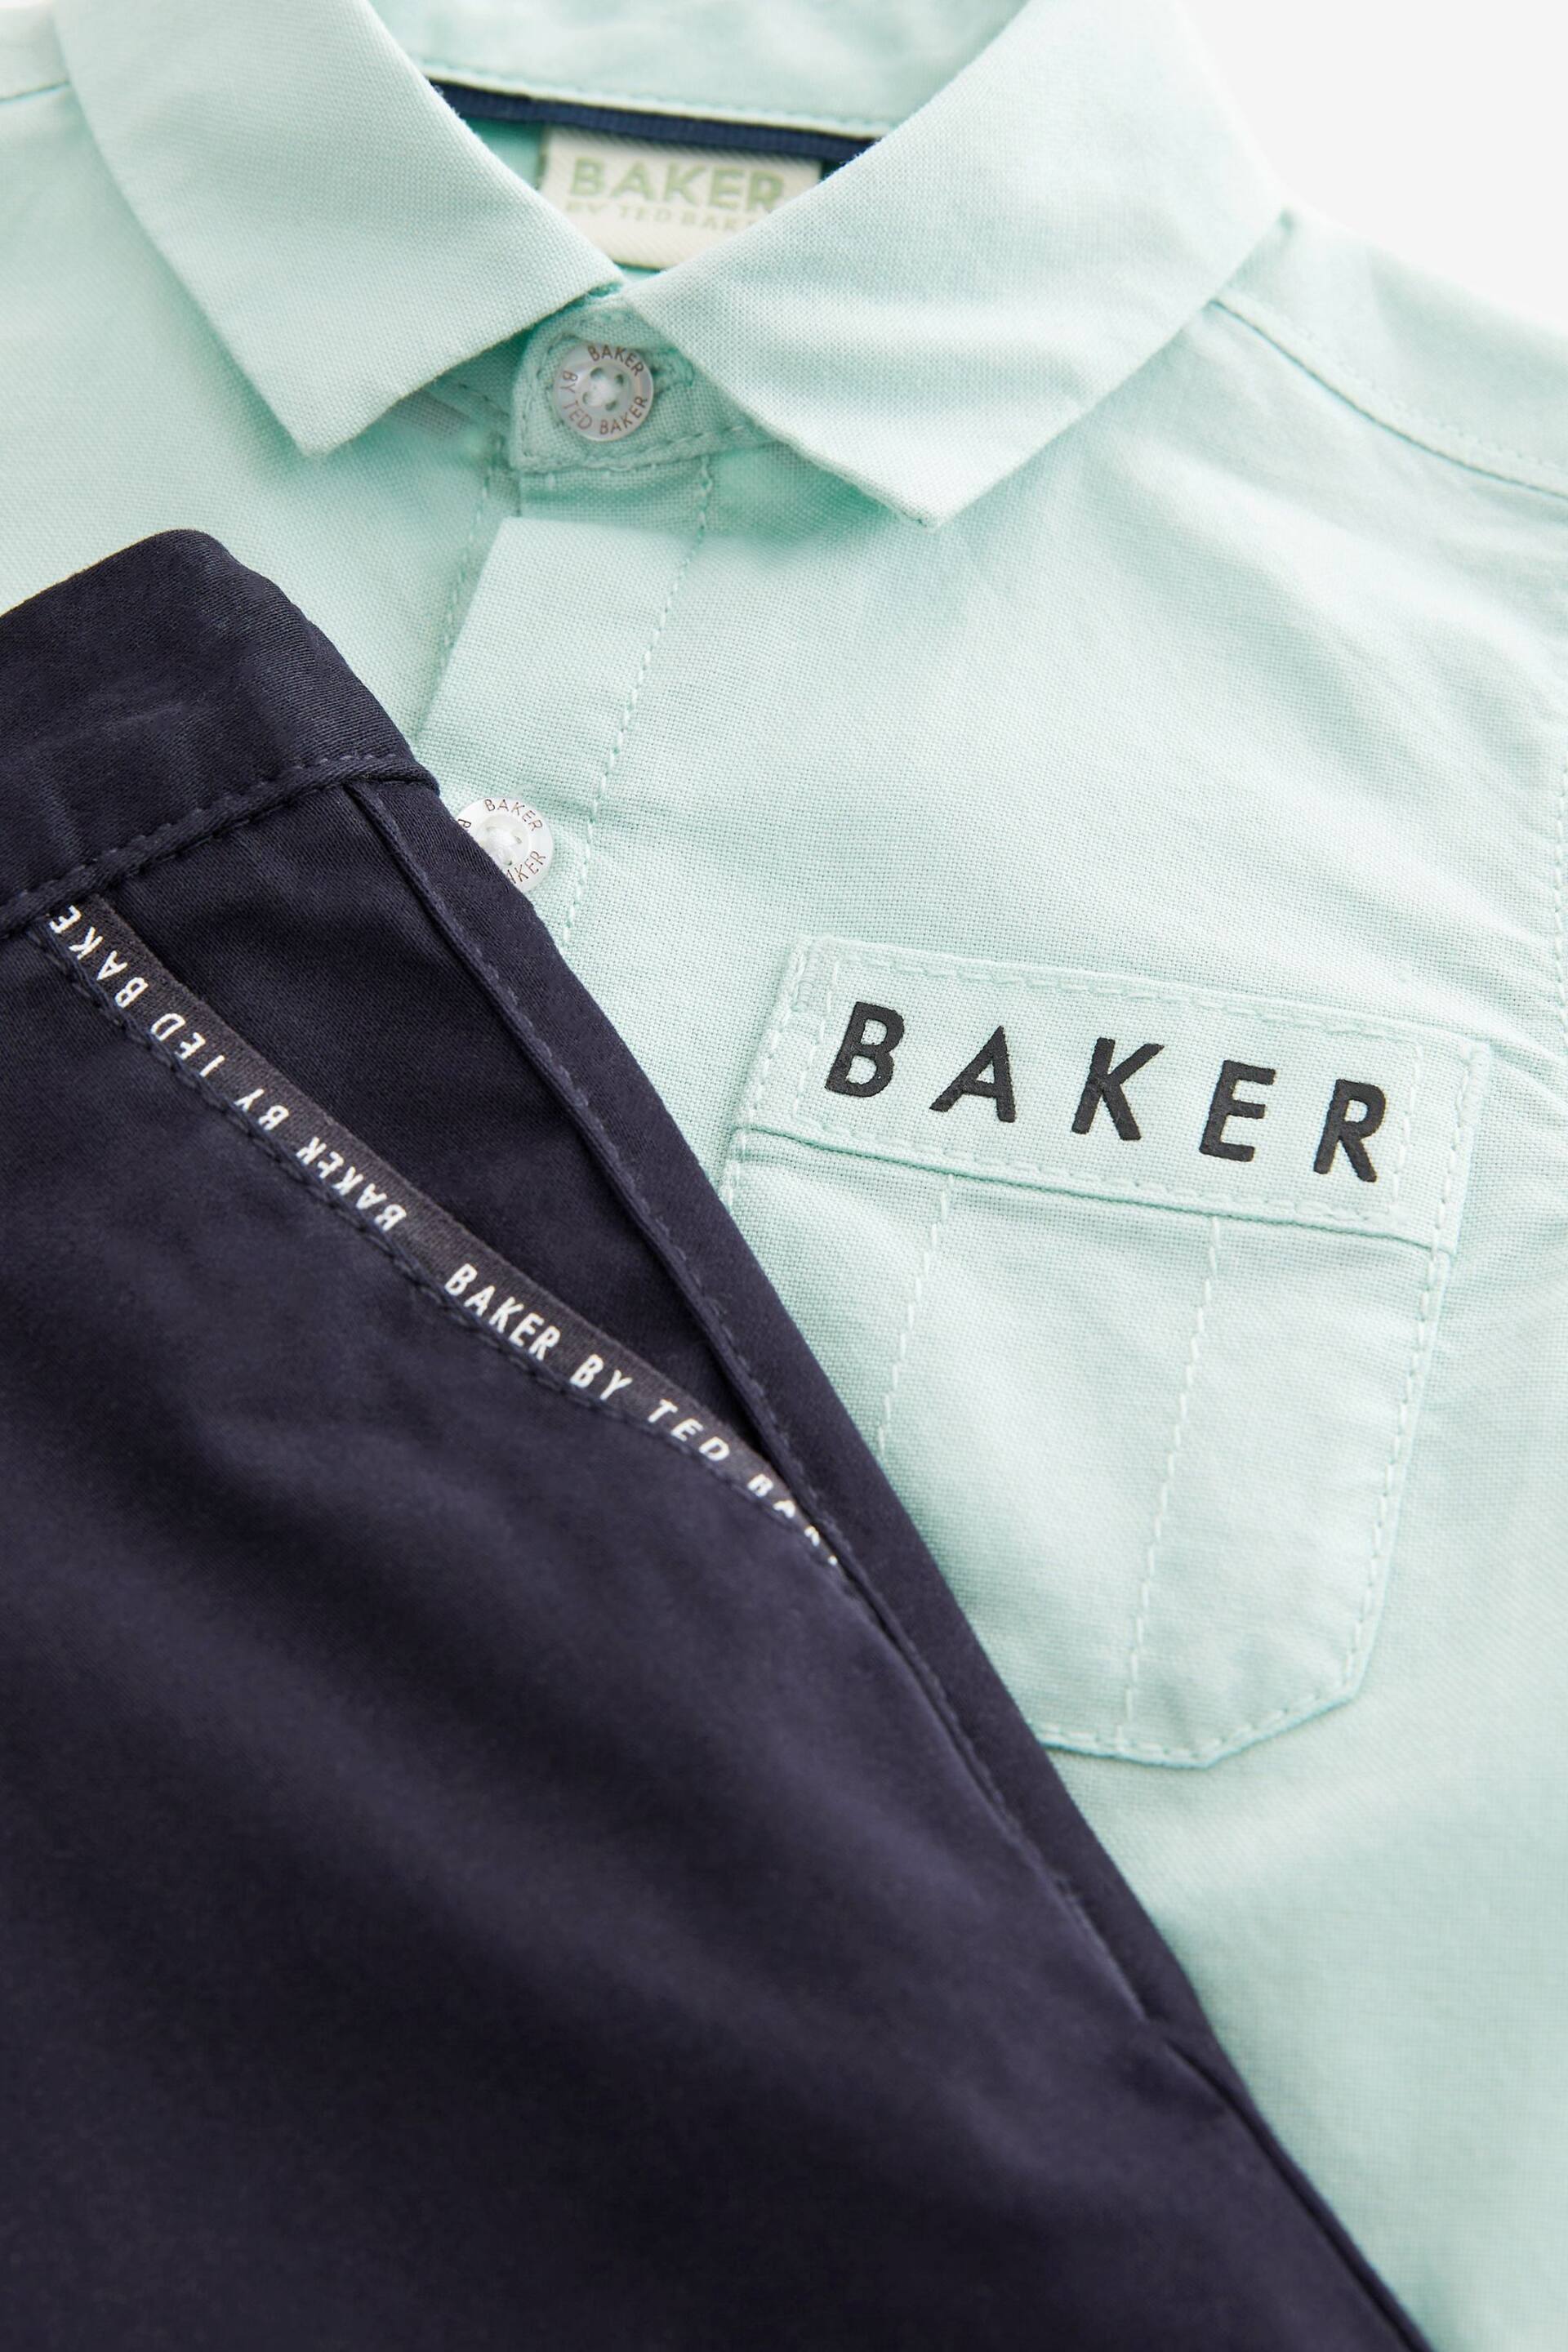 Baker by Ted Baker Shirt and Trousers Set - Image 10 of 11